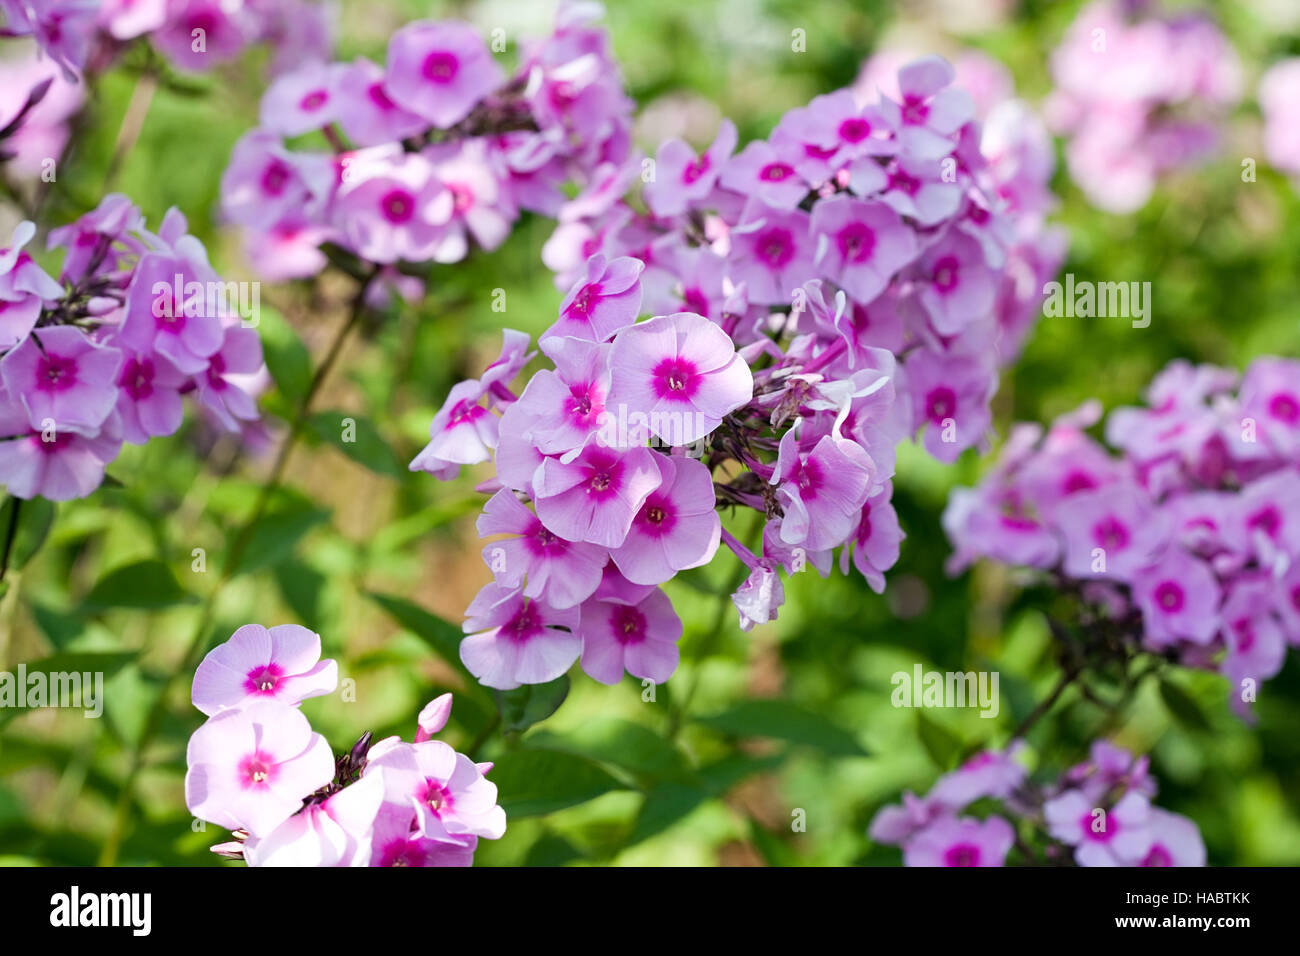 phlox flowers closeup on summer green leaves background Stock Photo